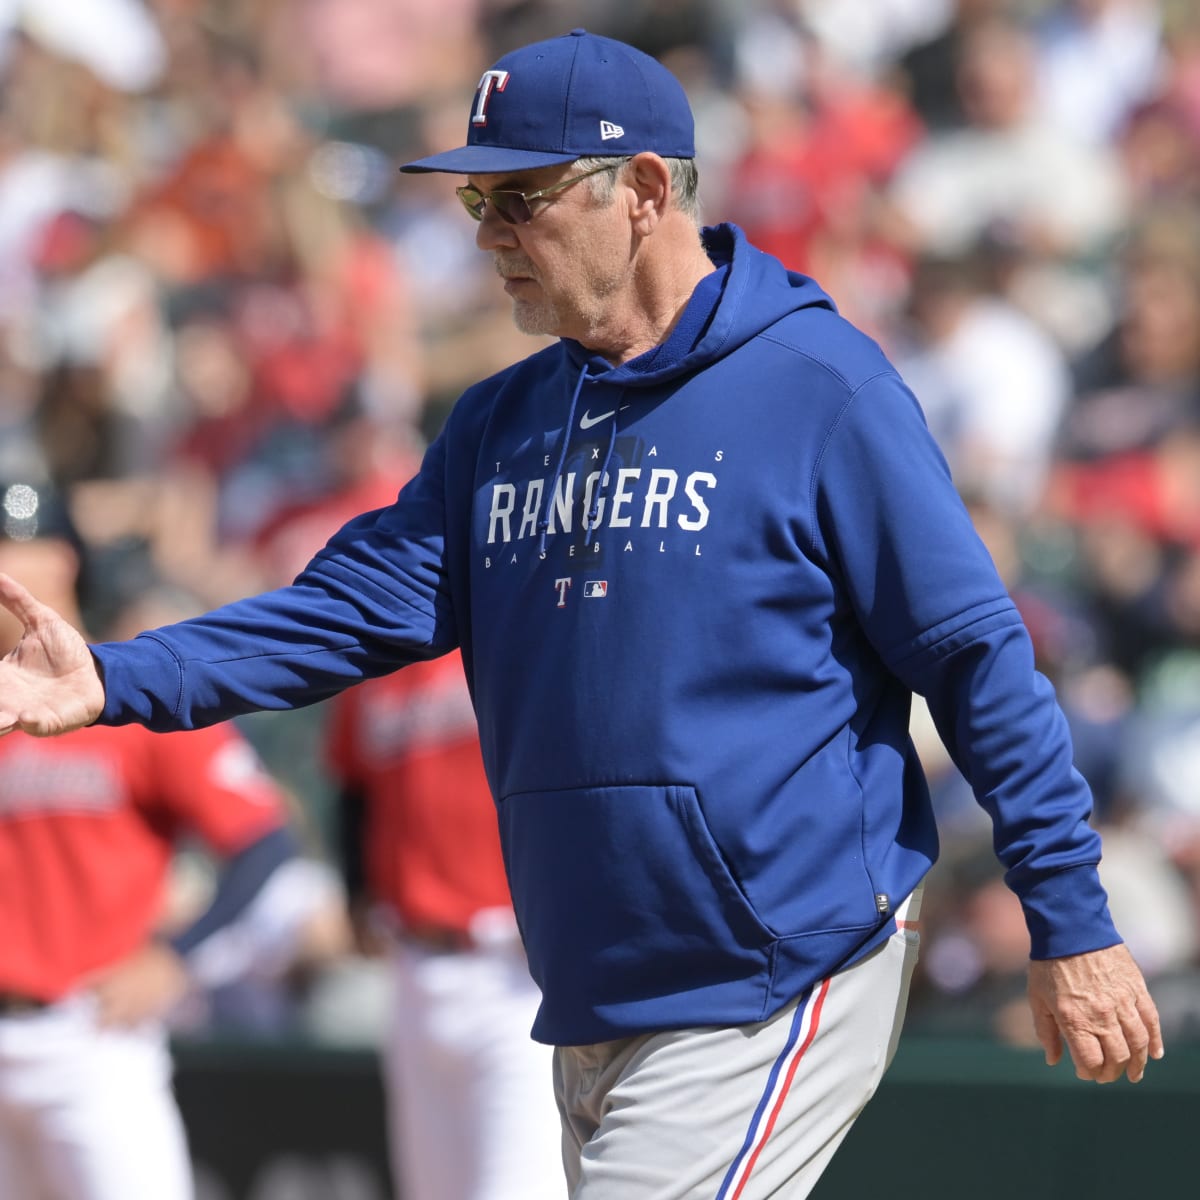 Texas Rangers manager Bruce Bochy leads the Rangers to a sweep of